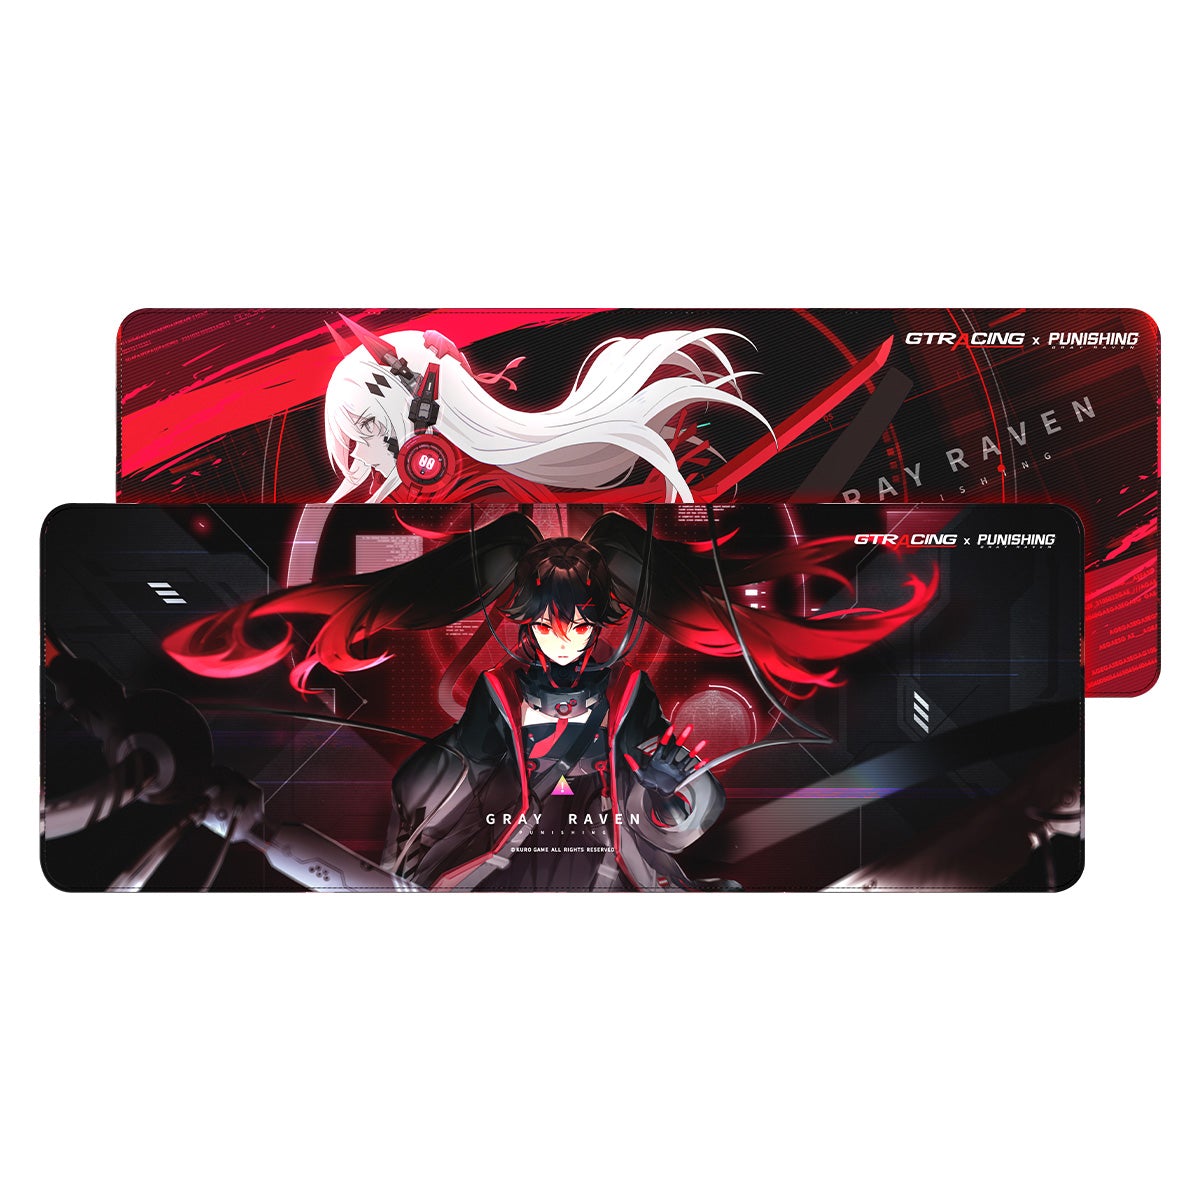 Guilty Crown mousepad 700x400x3mm gaming mouse pad New arrival